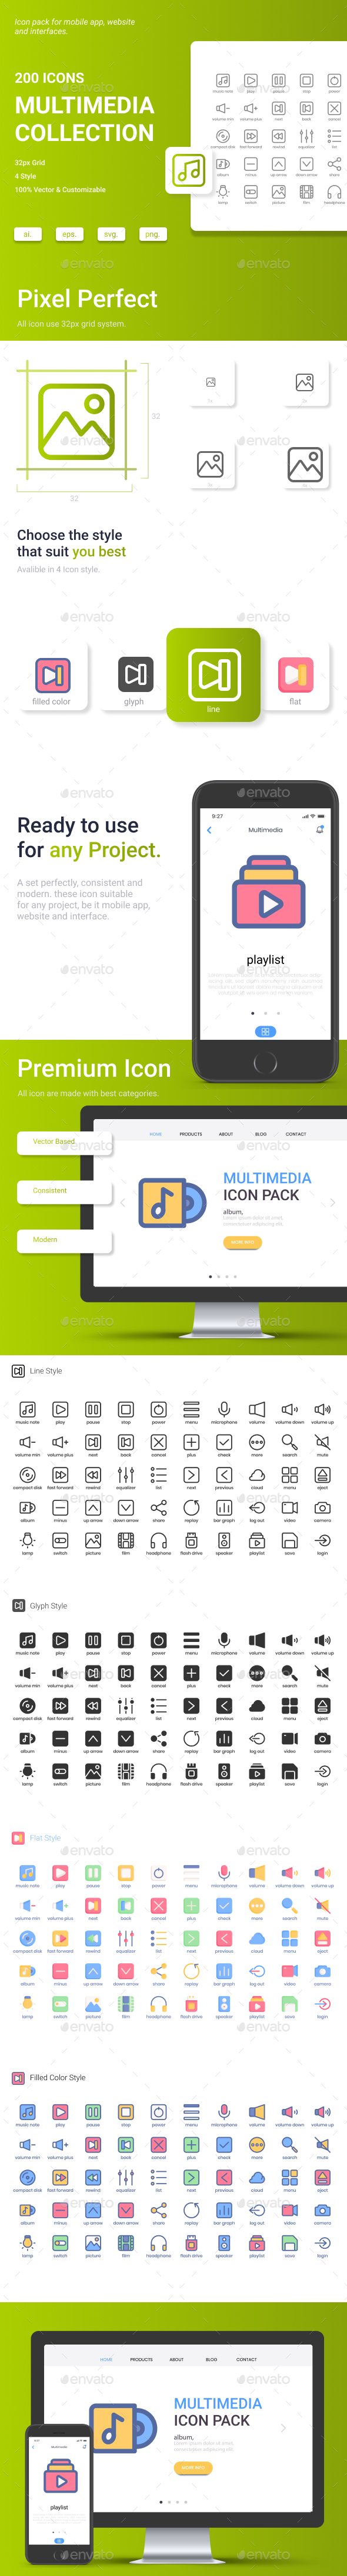 [DOWNLOAD]Multimedia Collection icon Set